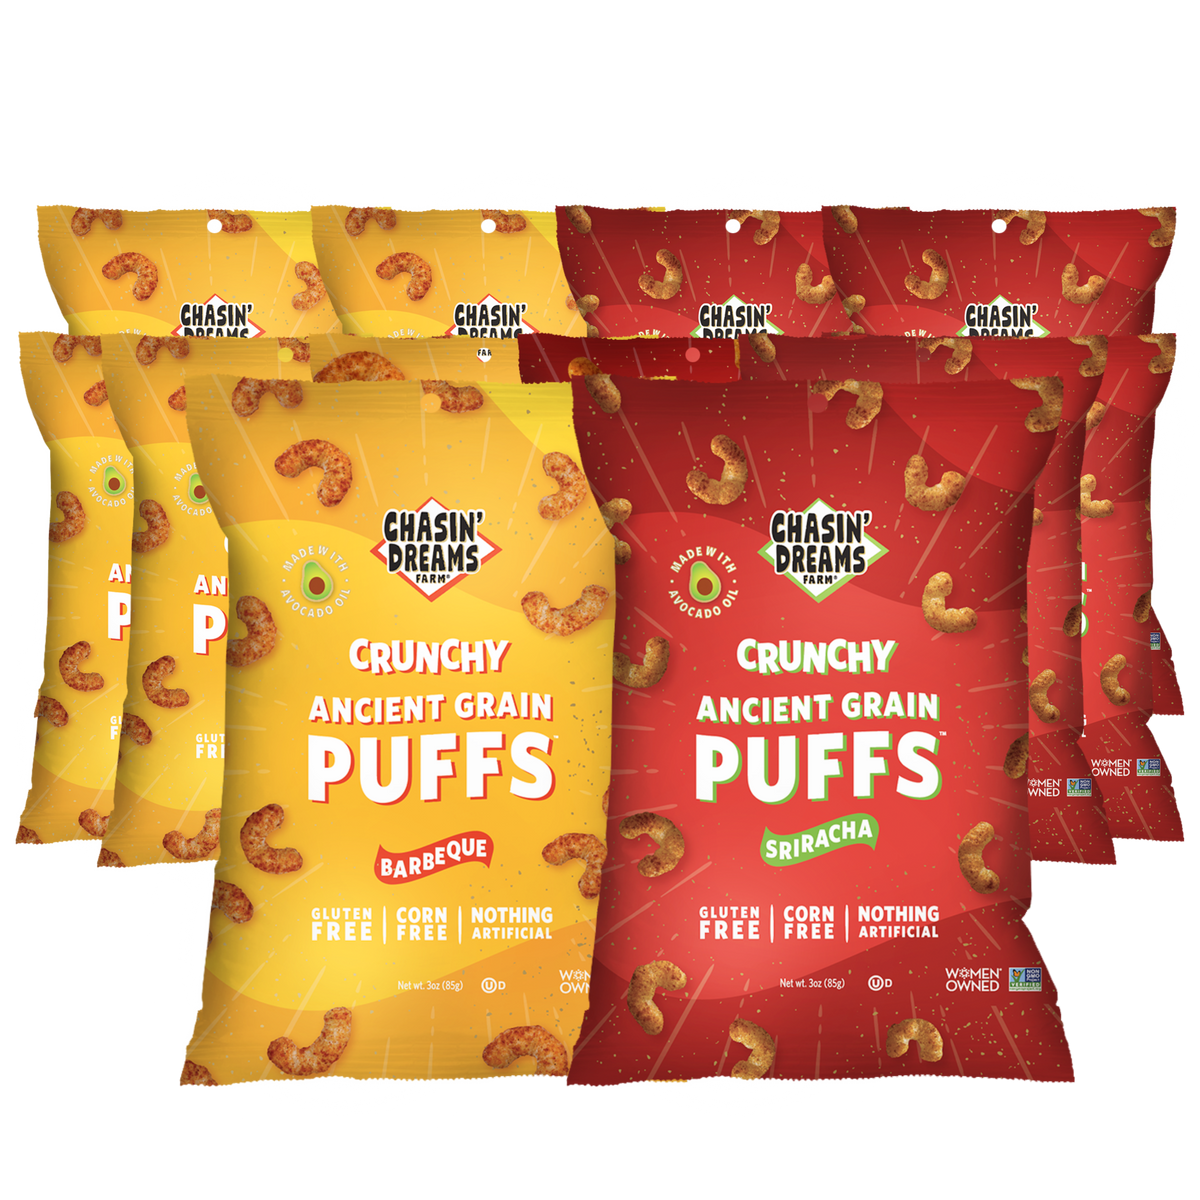 Six yellow bags of Crunchy Ancient Grain Barbeque Puffs 3oz and six red bags of Sriracha Puffs 3oz.